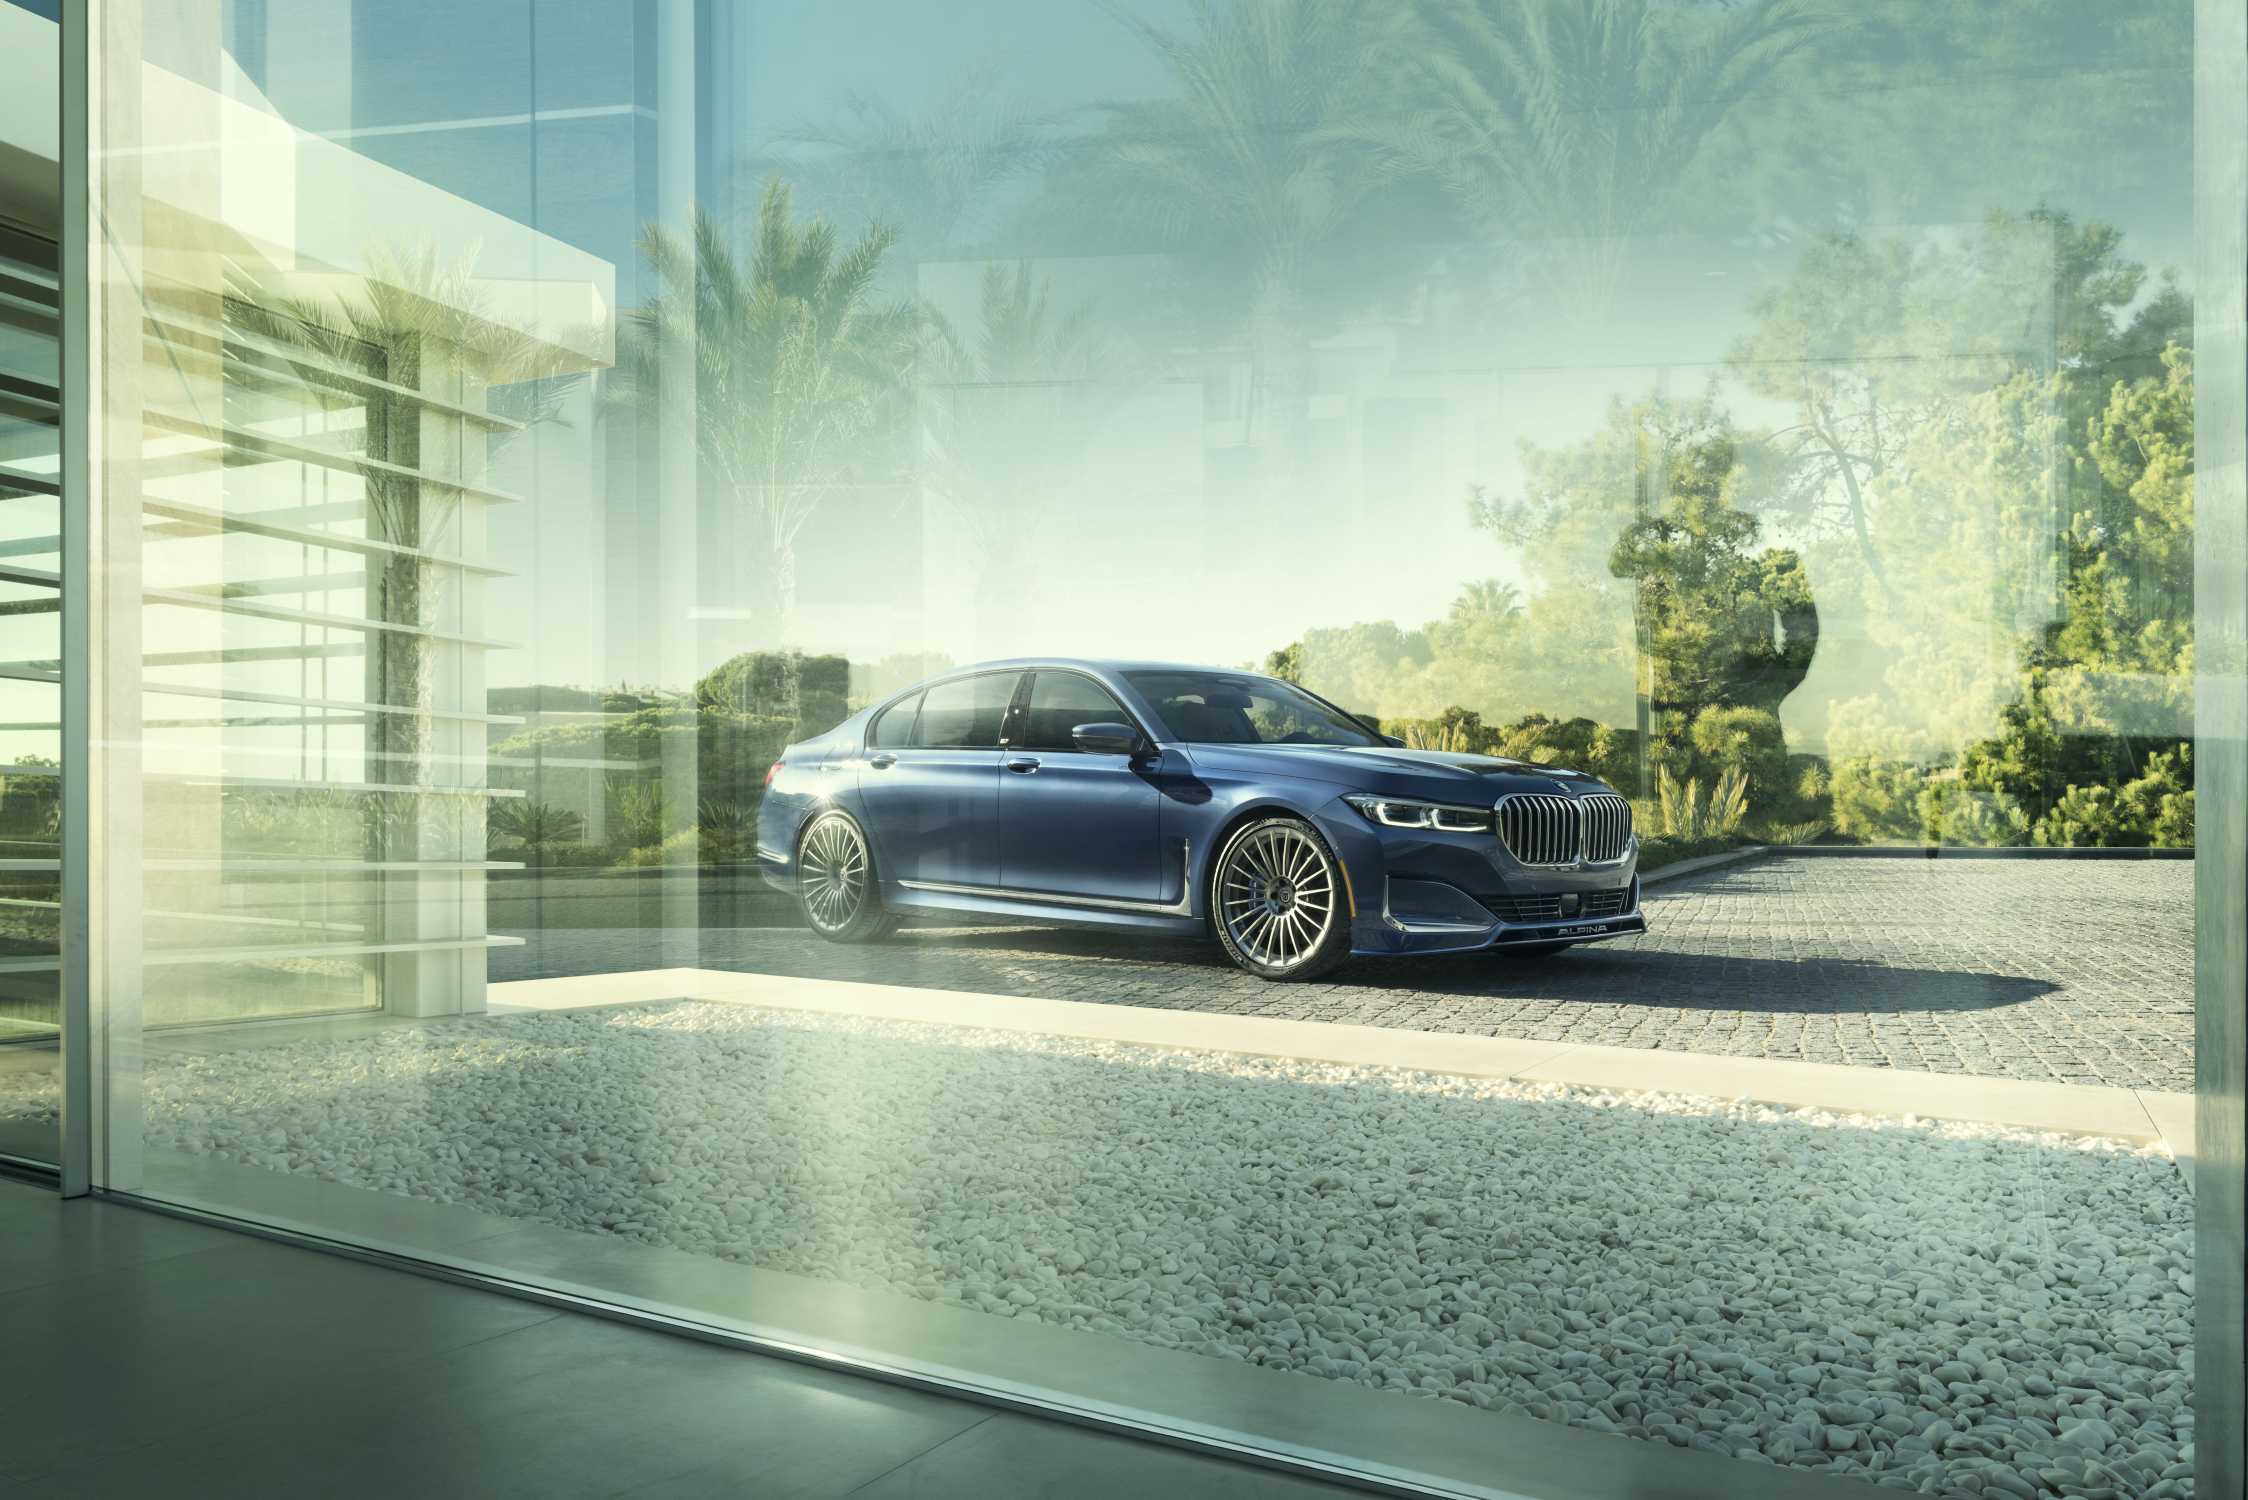 The new 2020 ALPINA B7 xDrive Sedan - Power, Dynamics and Luxury in a new  contemporary Design.